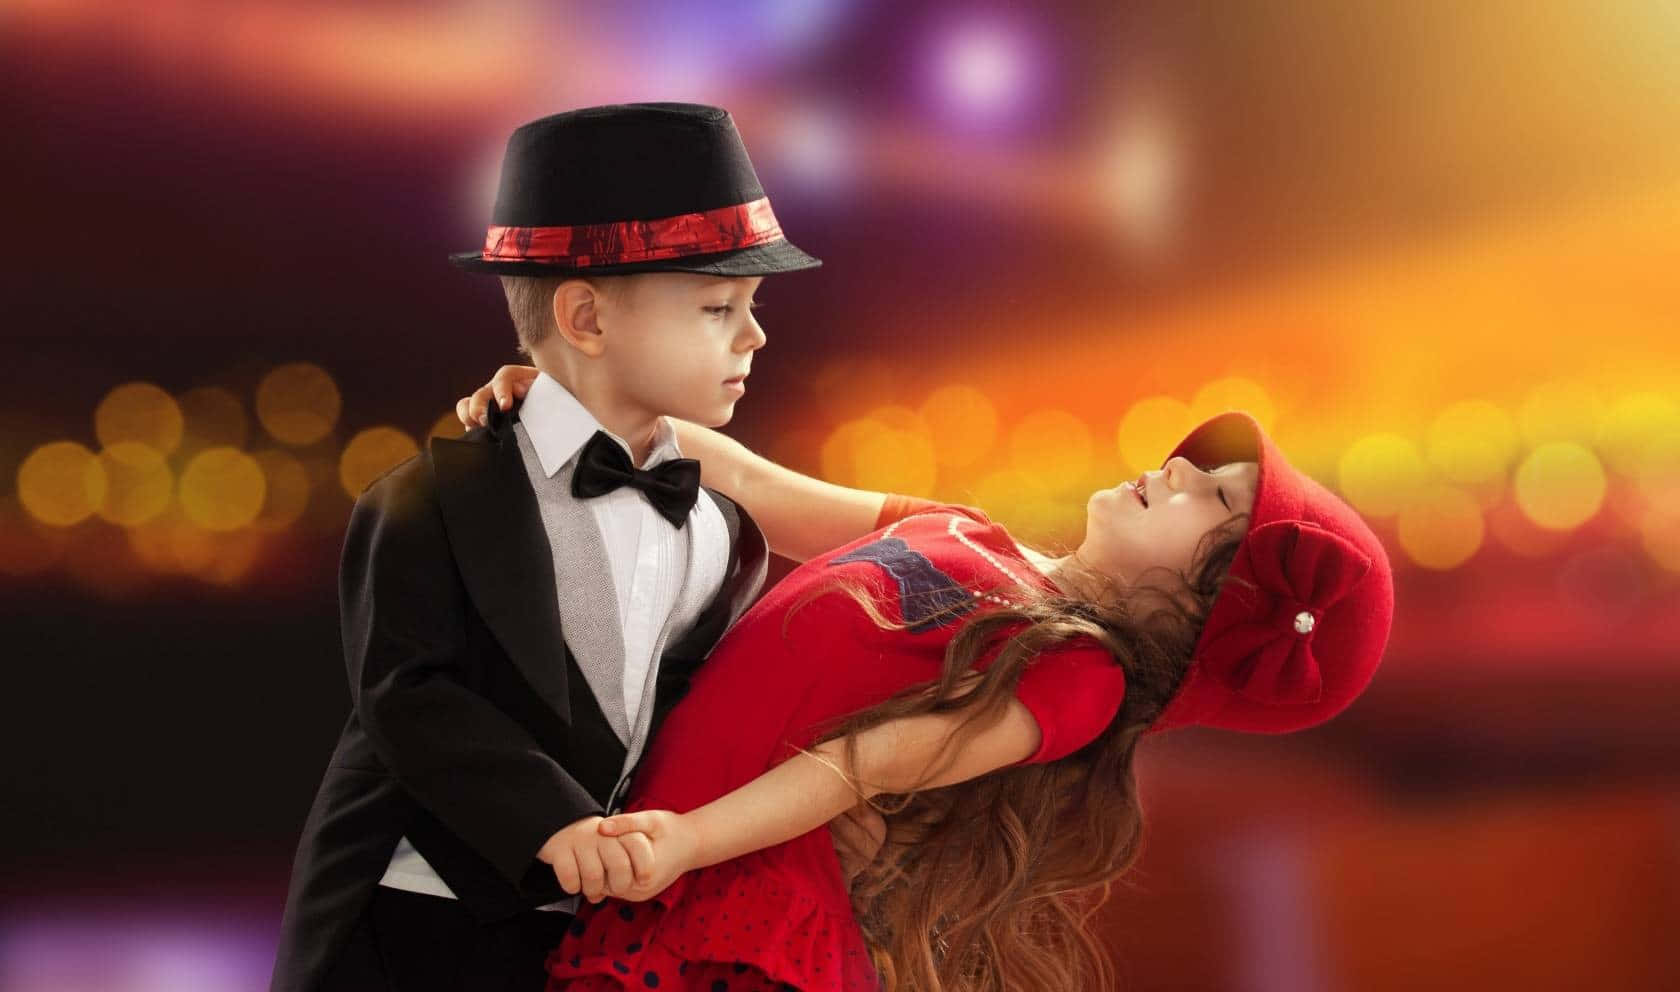 A Couple Of Children Dancing In A Red Dress